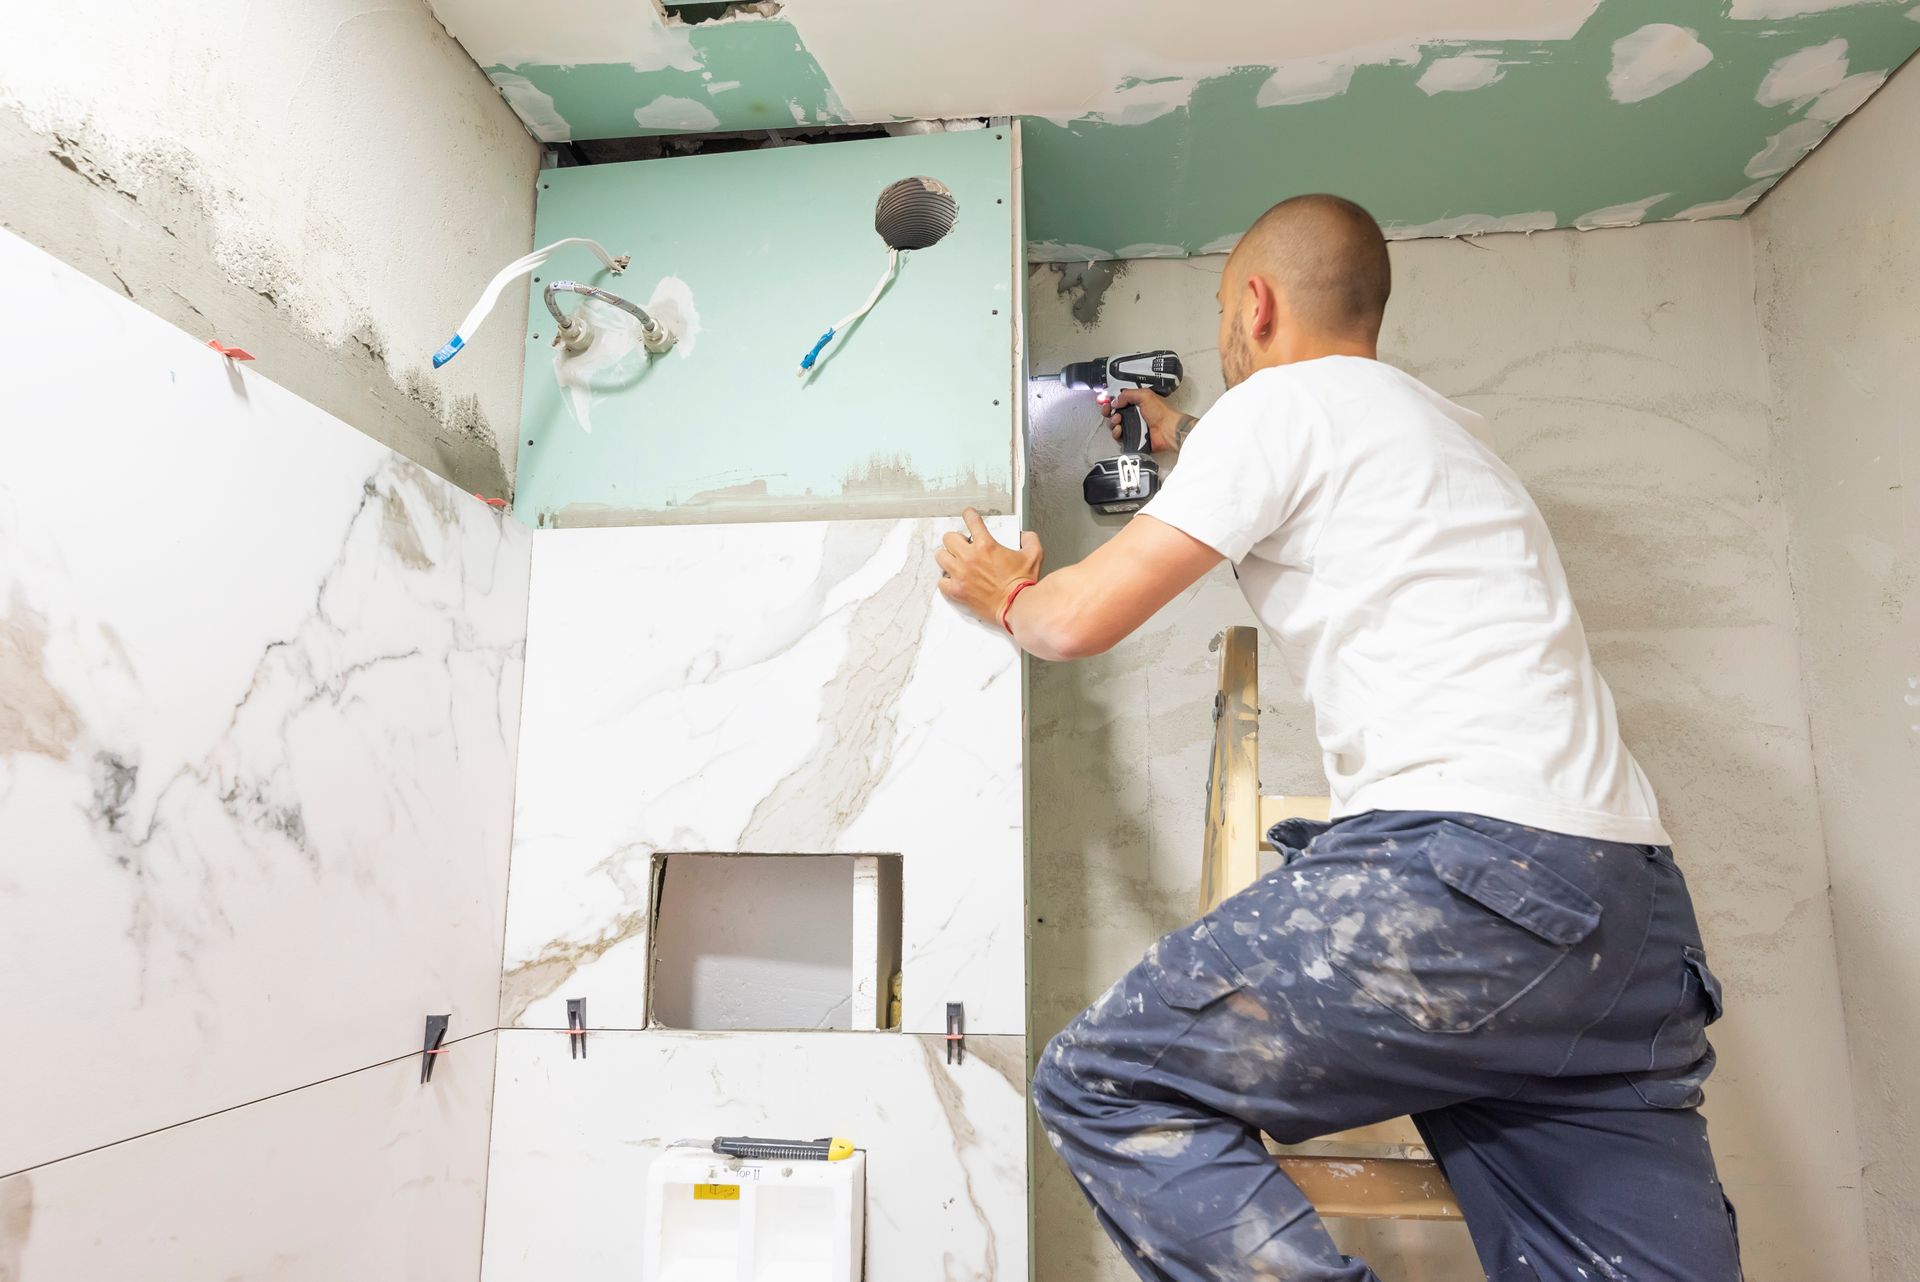 a man is working on a bathroom 
wall with a drill